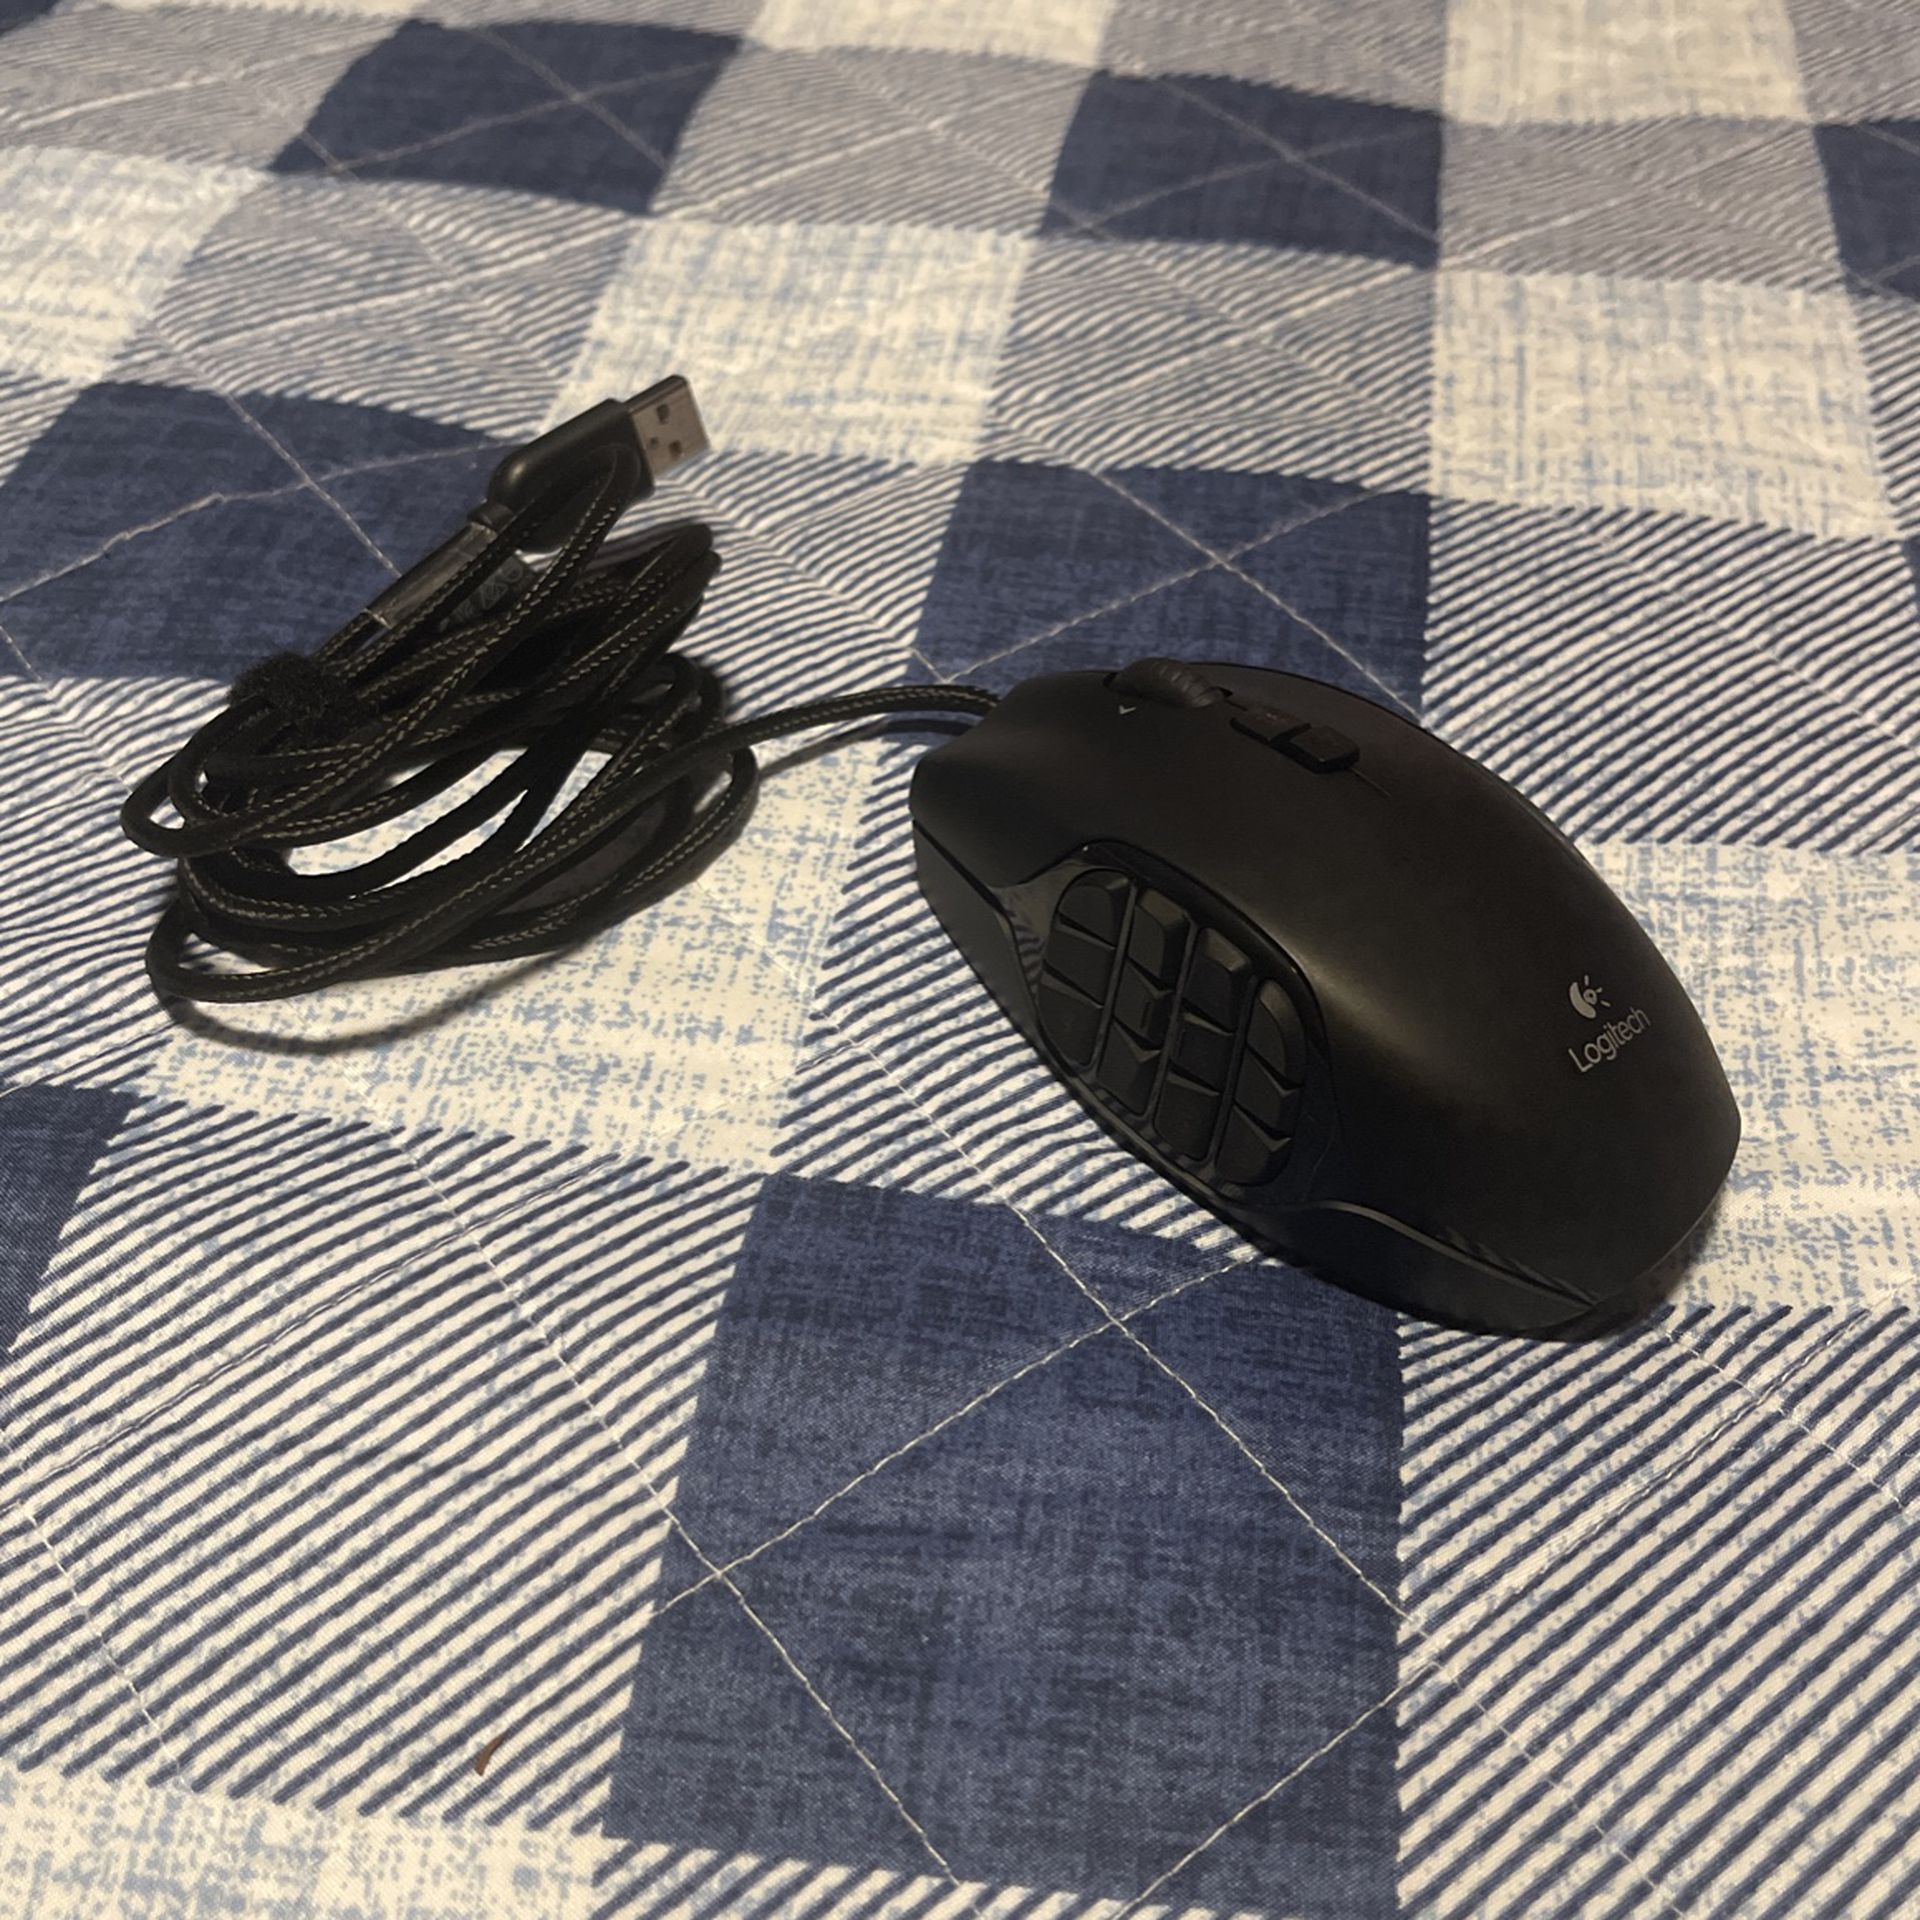 Logitech G600 Wired Mouse